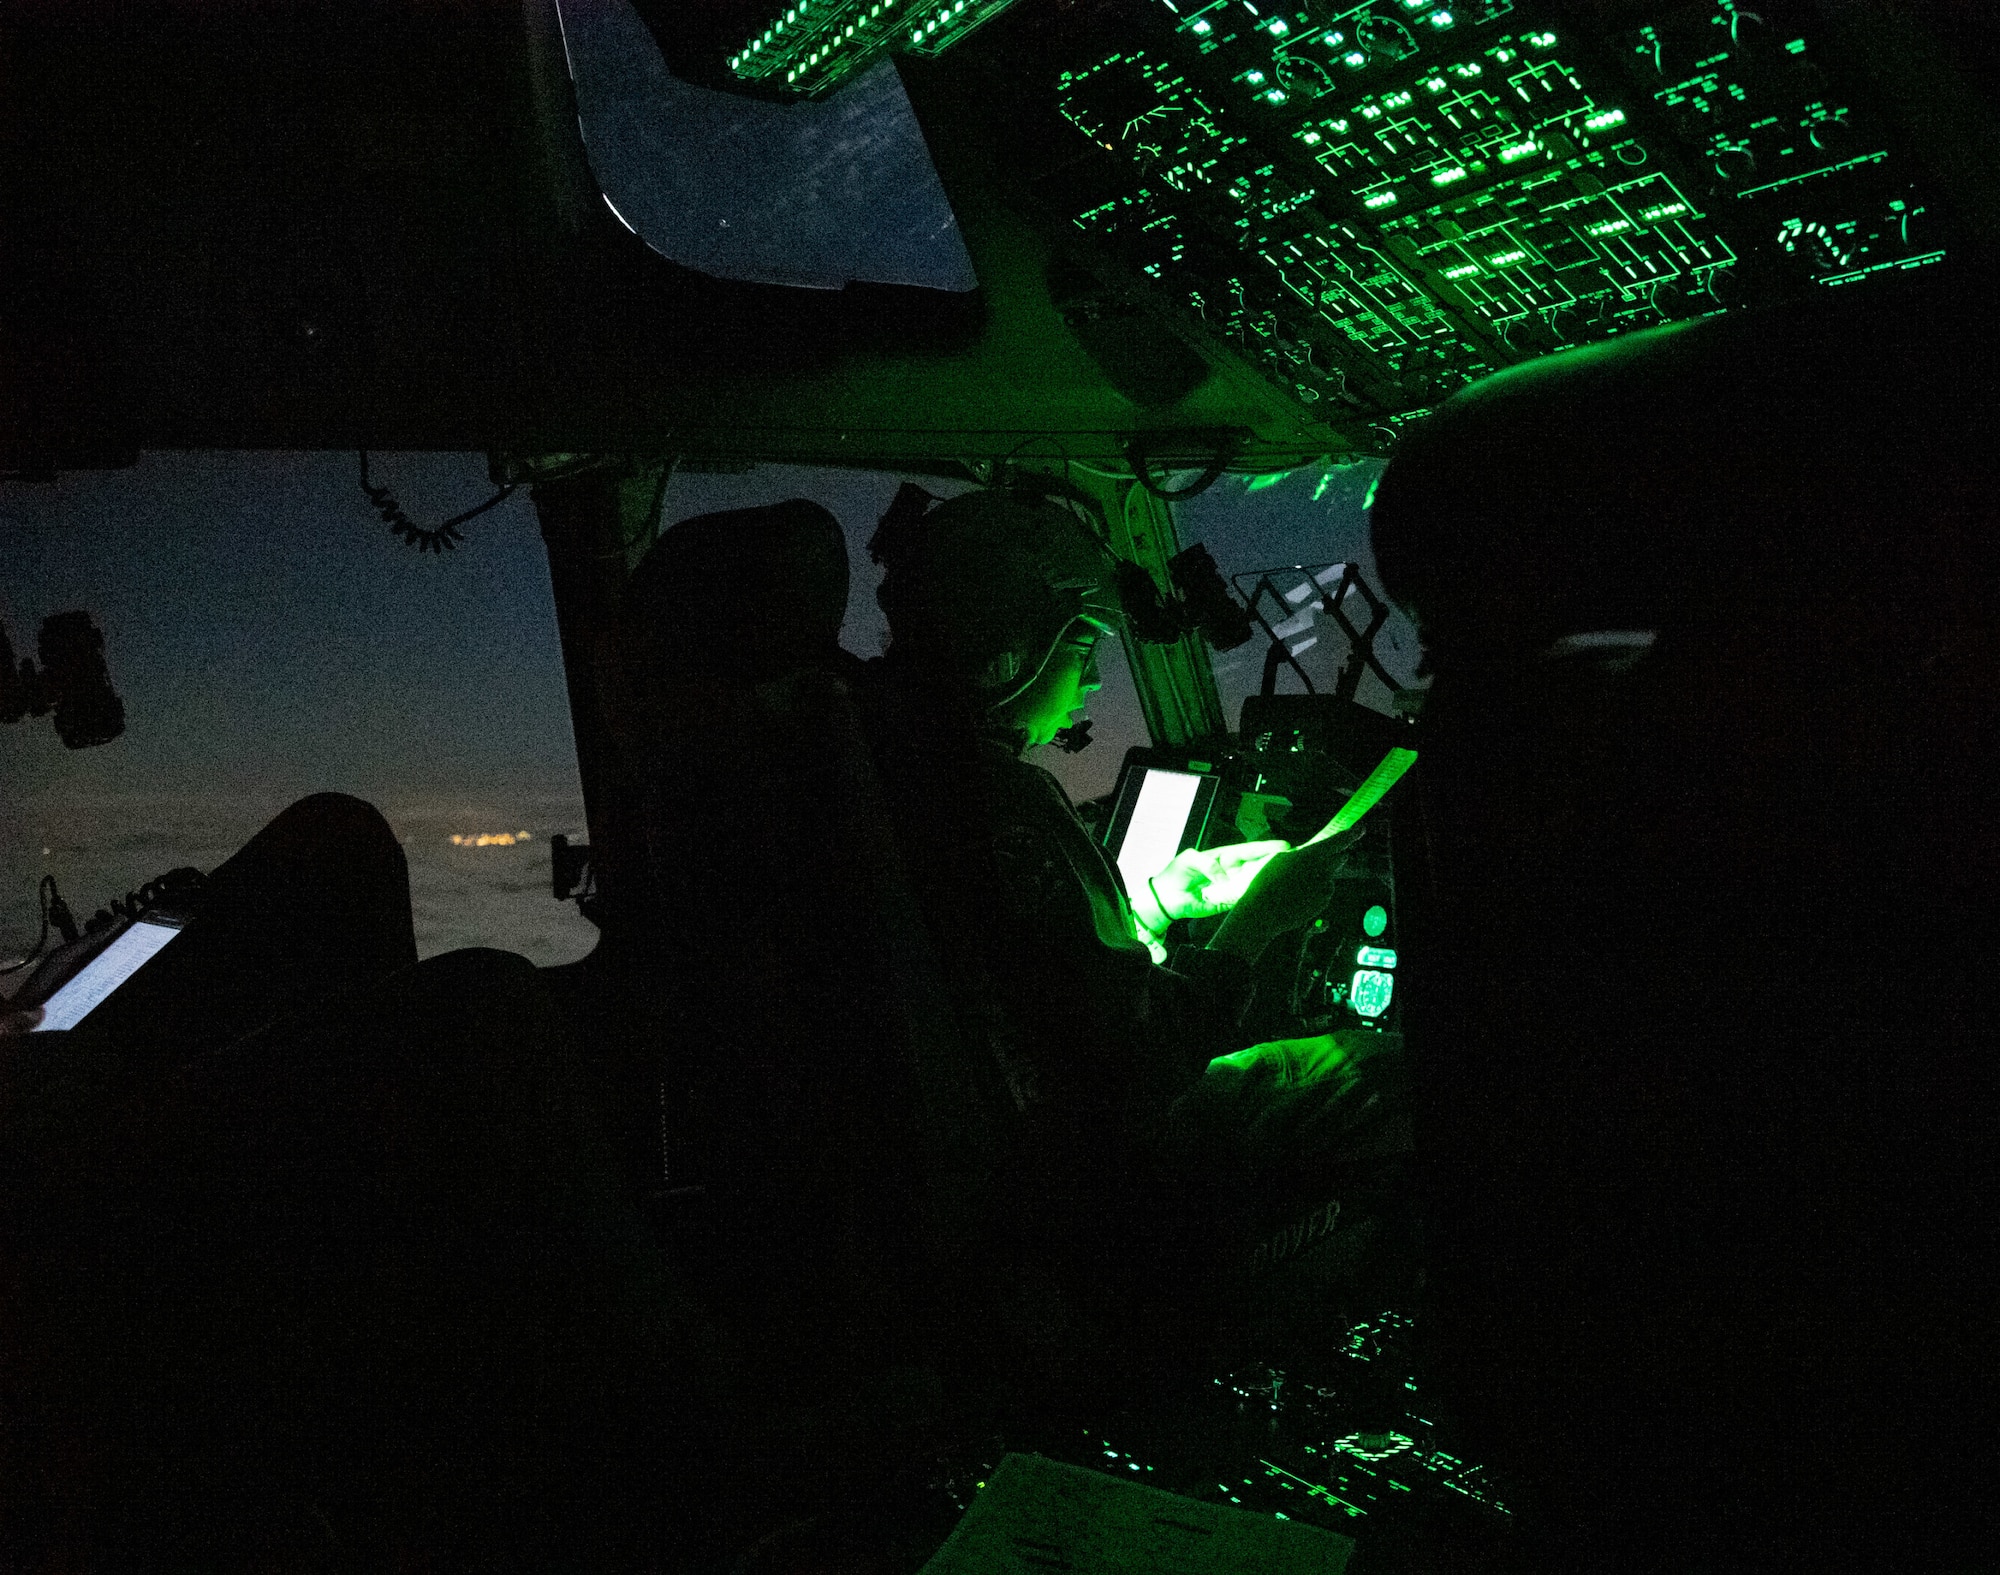 Capt. Sarah Aravich, 3rd Airlift Squadron pilot, views a map during a low-light training sortie on a C-17 Globemaster III, over Pennsylvania, Jan. 28, 2021. In combat, flying at night without artificial light minimizes visibility of the aircraft and reduces threat from potential enemies. The 3rd AS routinely trains to support global engagement through direct delivery of time-critical theater deployment assets and ensure aircrew operational readiness. (U.S. Air Force photo by Airman 1st Class Faith Schaefer)